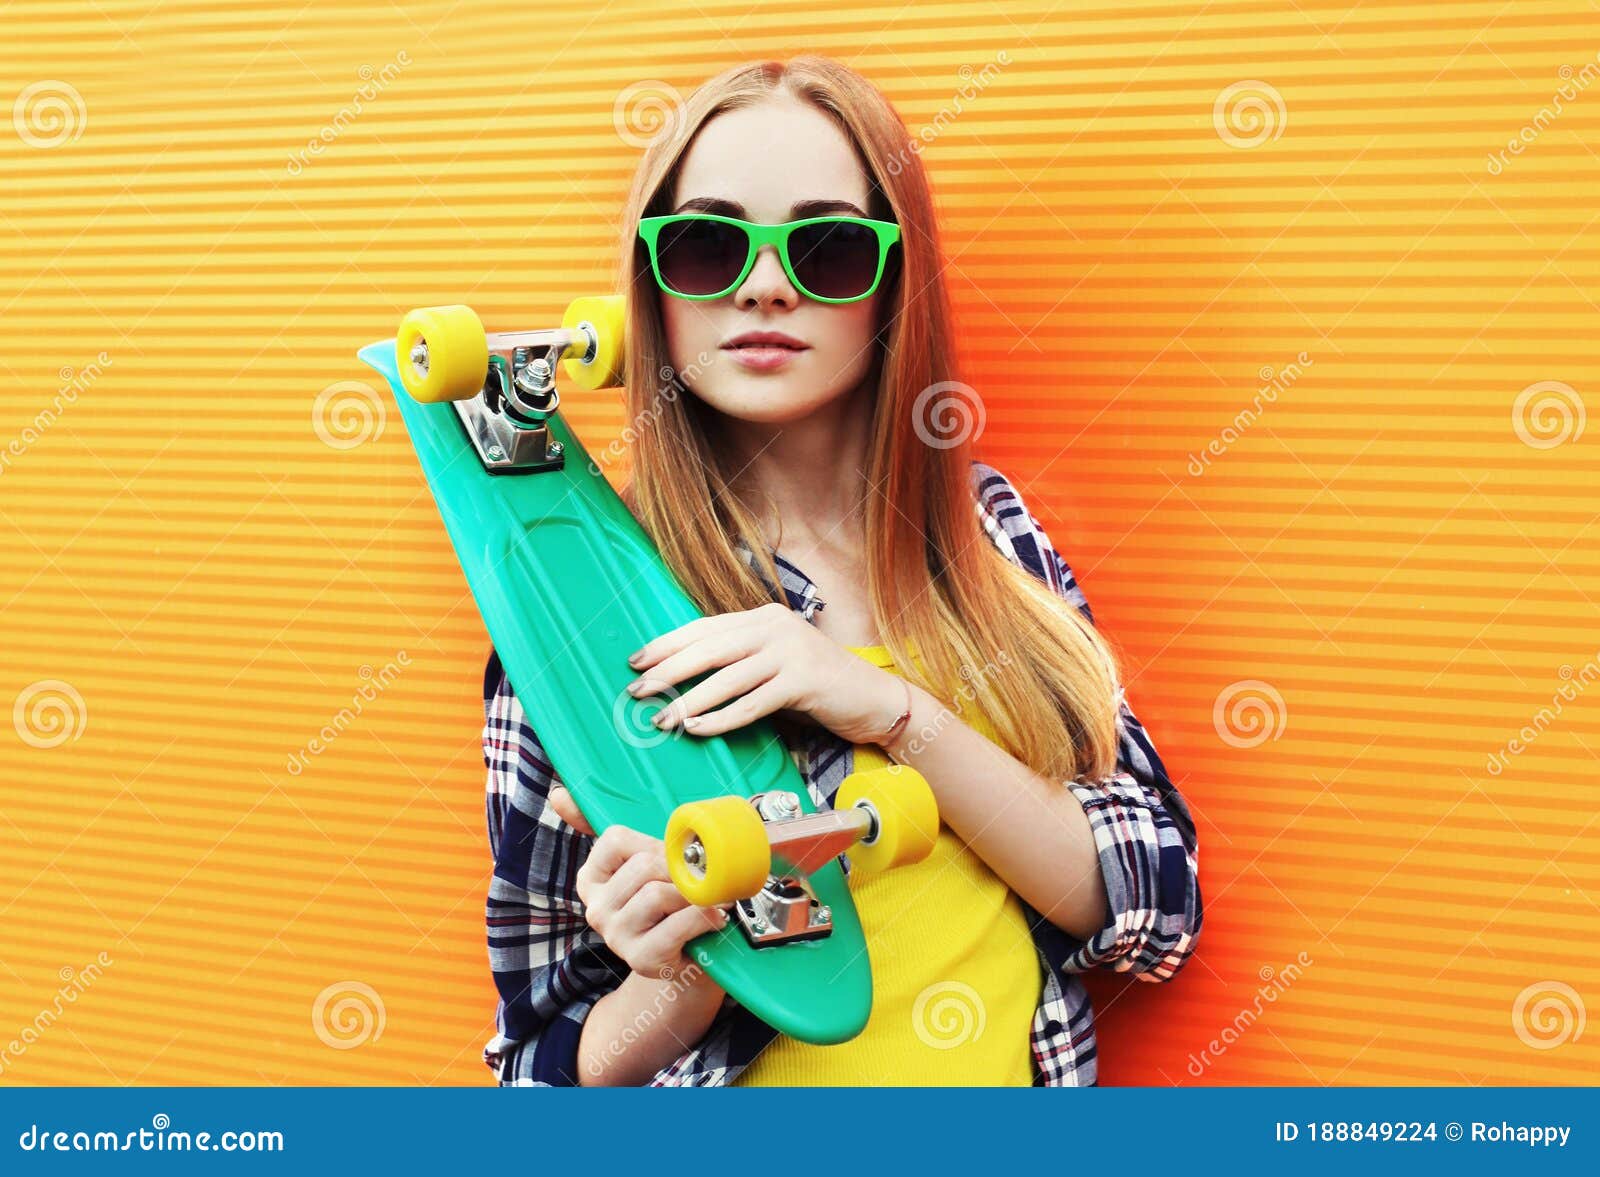 Portrait Young Blonde Woman with Green Skateboard Wearing a Sunglasses ...